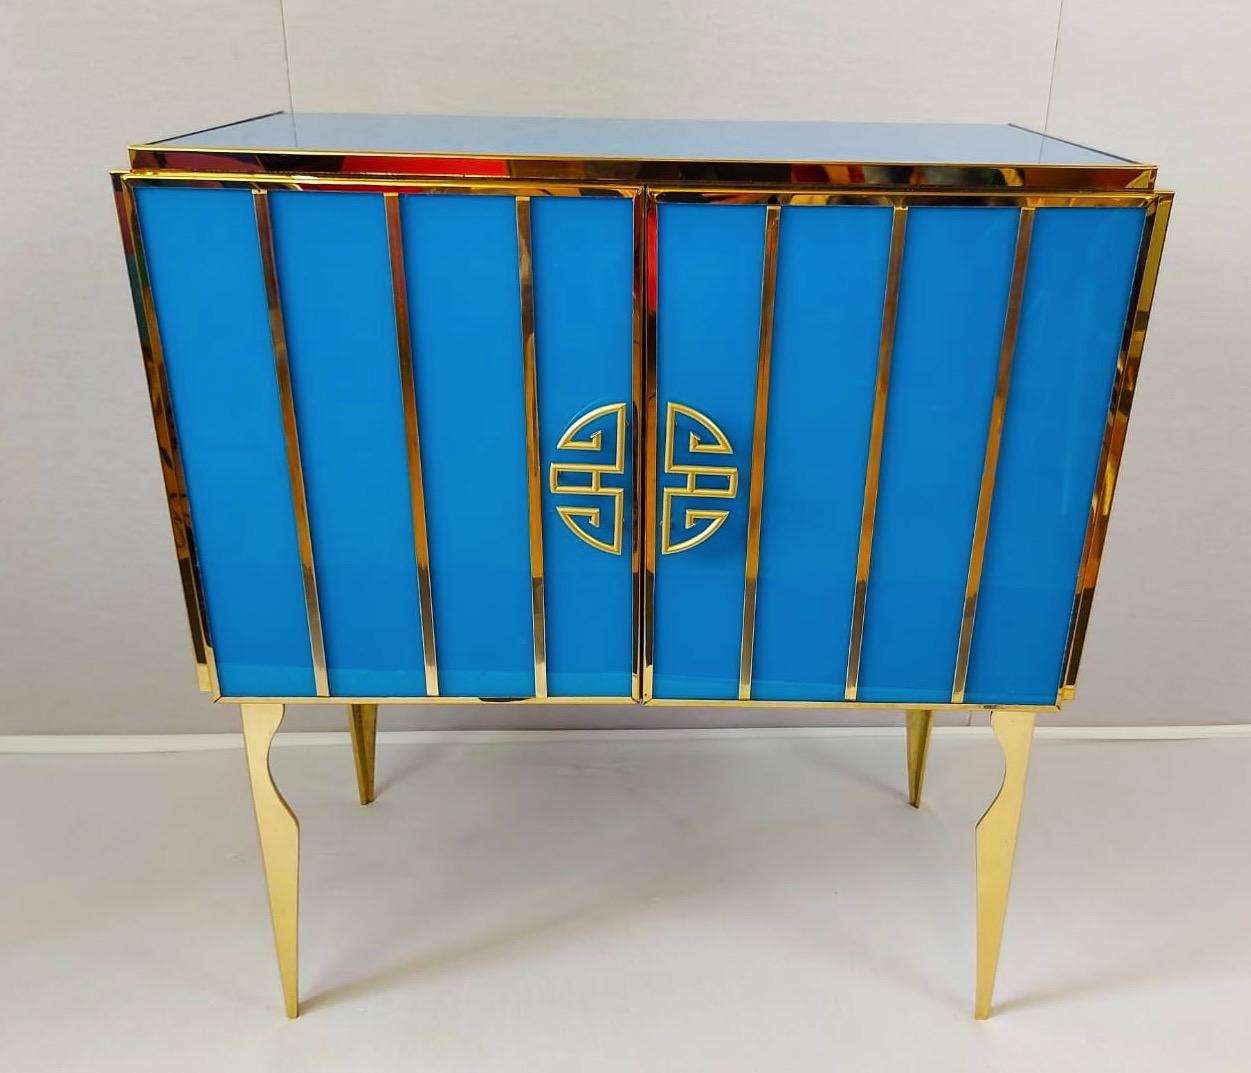 He and she pair of very fine handmade Cabinet by a master artisan. Brass frame with handmade and handcut cobalt blue and white opaline Murano glass raised on special brass legs.
Offered separately or as a pair. Listed price is for custom made pair.